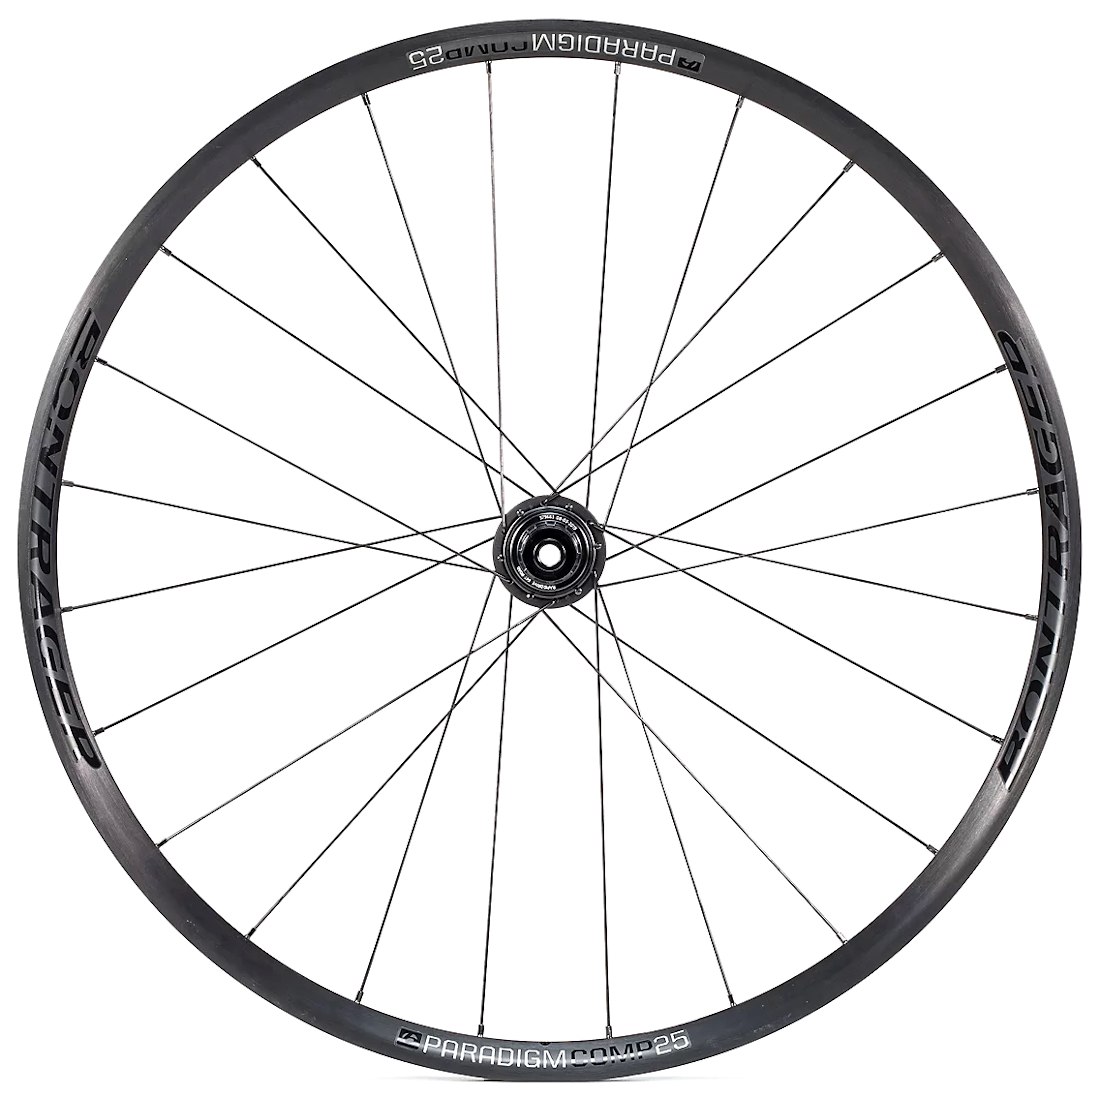 Picture of Bontrager Paradigm Comp 25 TLR Disc Road Rear Wheel - Clincher - Centerlock - 12x142mm